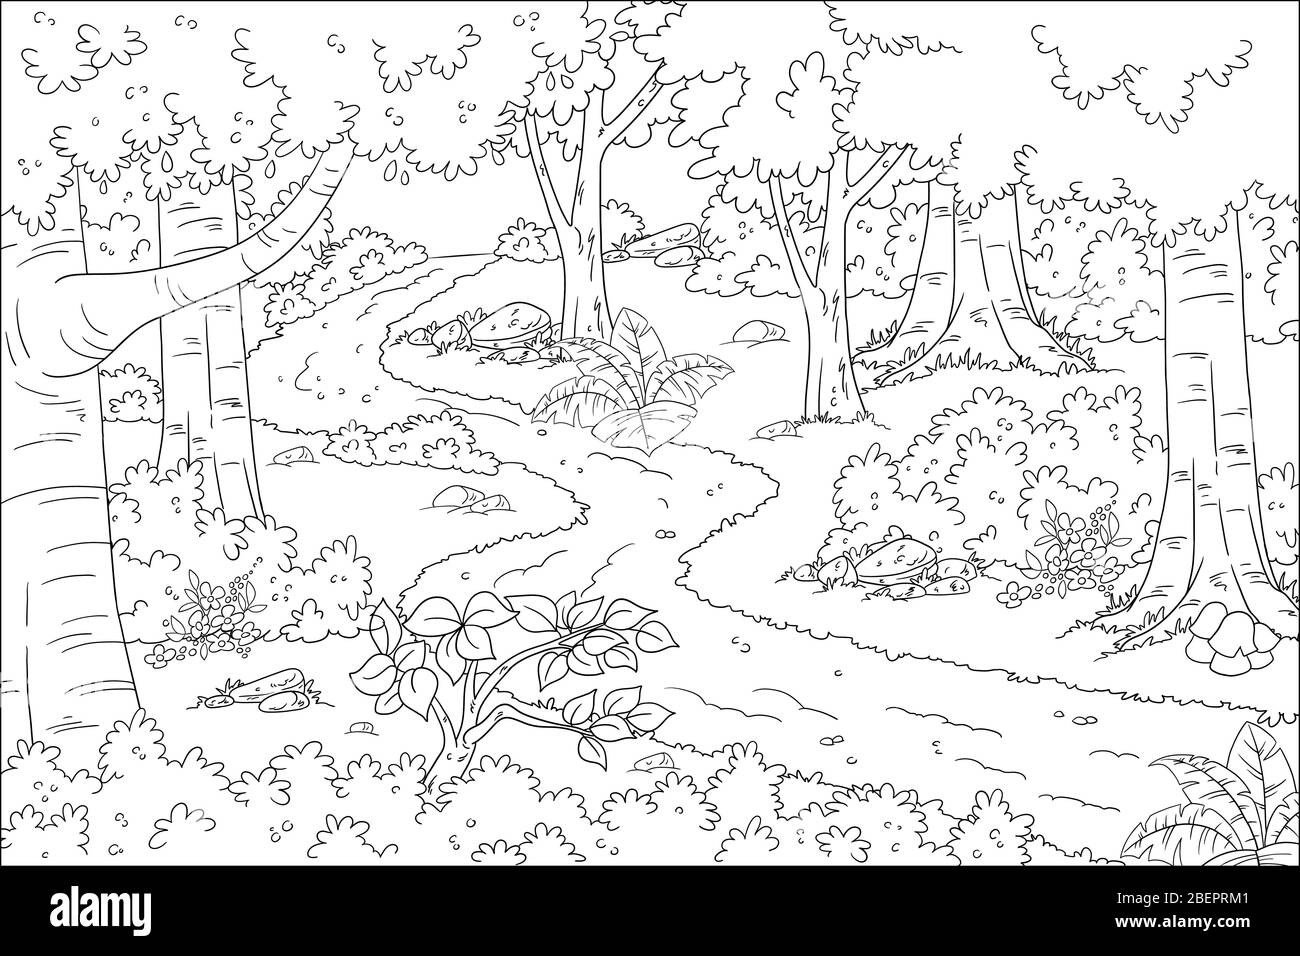 Coloring book landscape. Hand drawn vector illustration with separate layers. Stock Vector